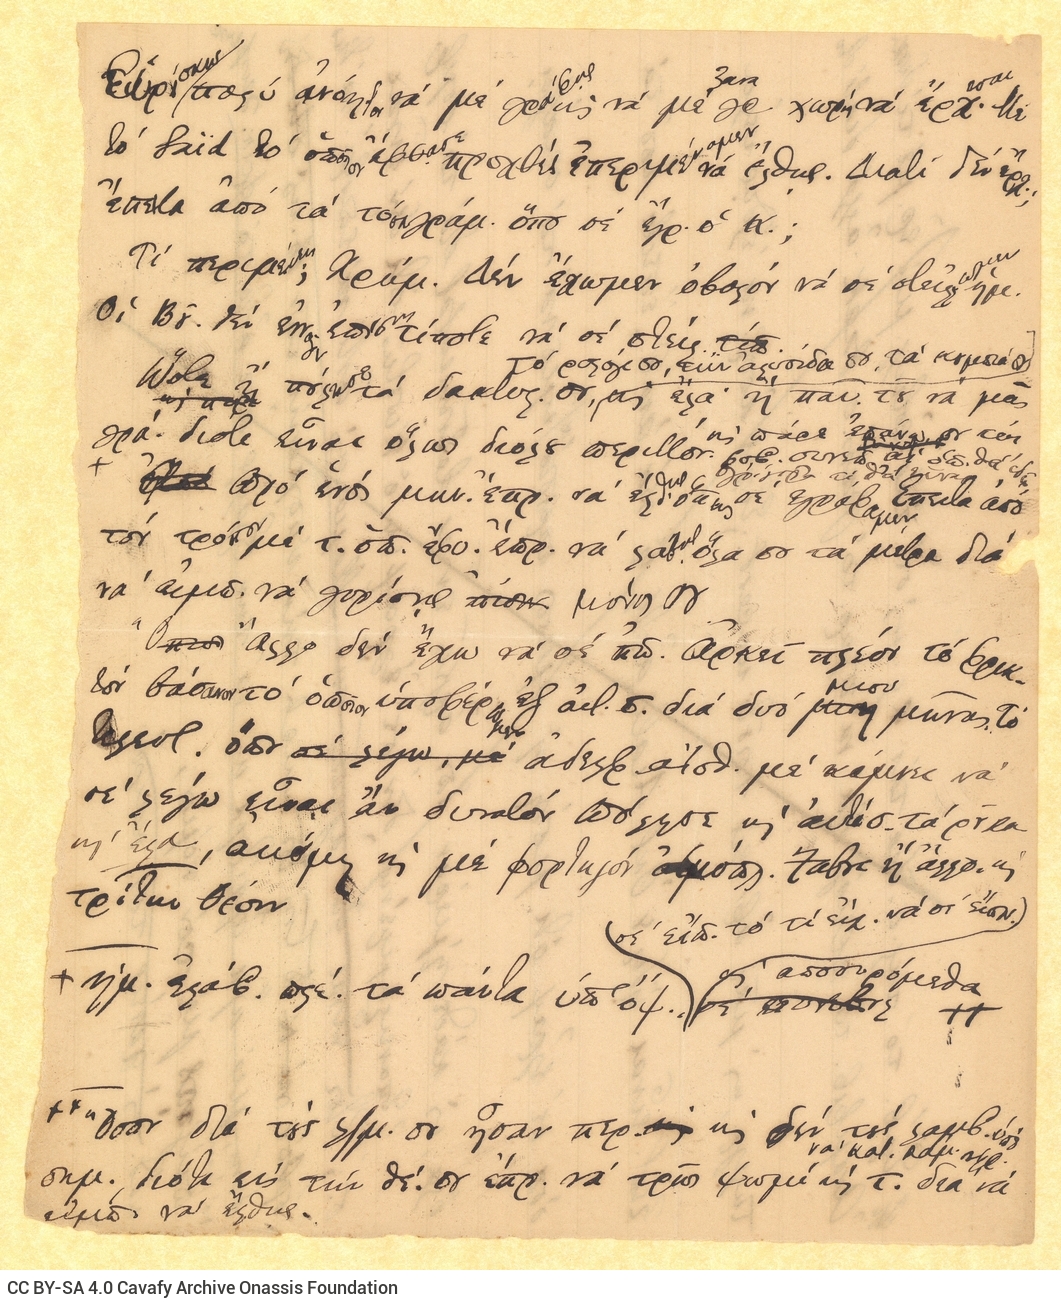 Fragment of a handwritten draft letter by C. P. Cavafy to his brother, Aristeidis, from the 1889 correspondence series, on bo